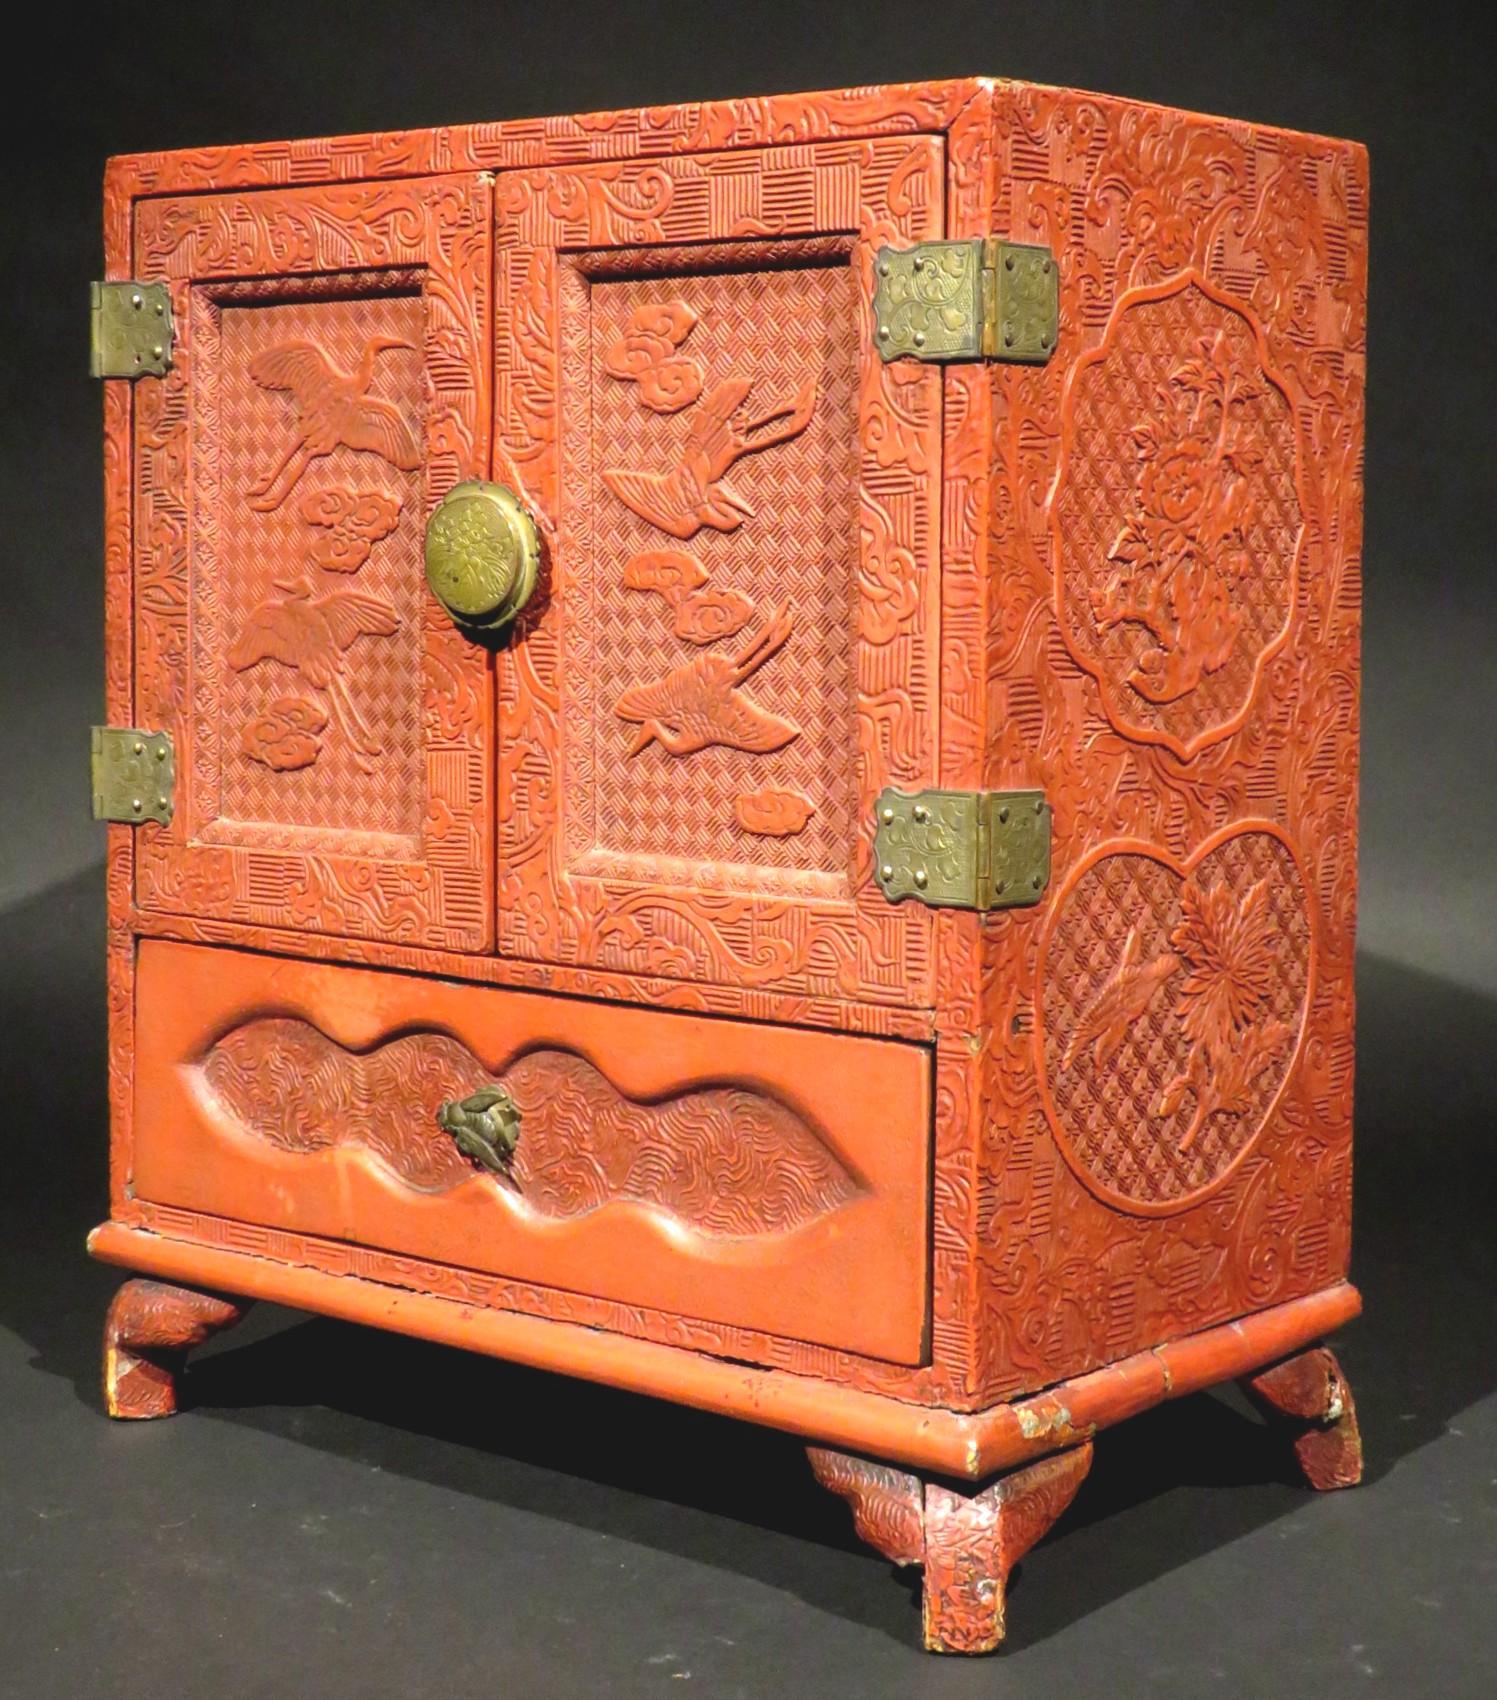 The top & sides decorated with cartouche shaped panels depicting fauna & flora, the front showing a pair of panelled doors decorated with flying cranes & clouds, the obverse decorated with dragonflies. The interior housing six drawers retaining